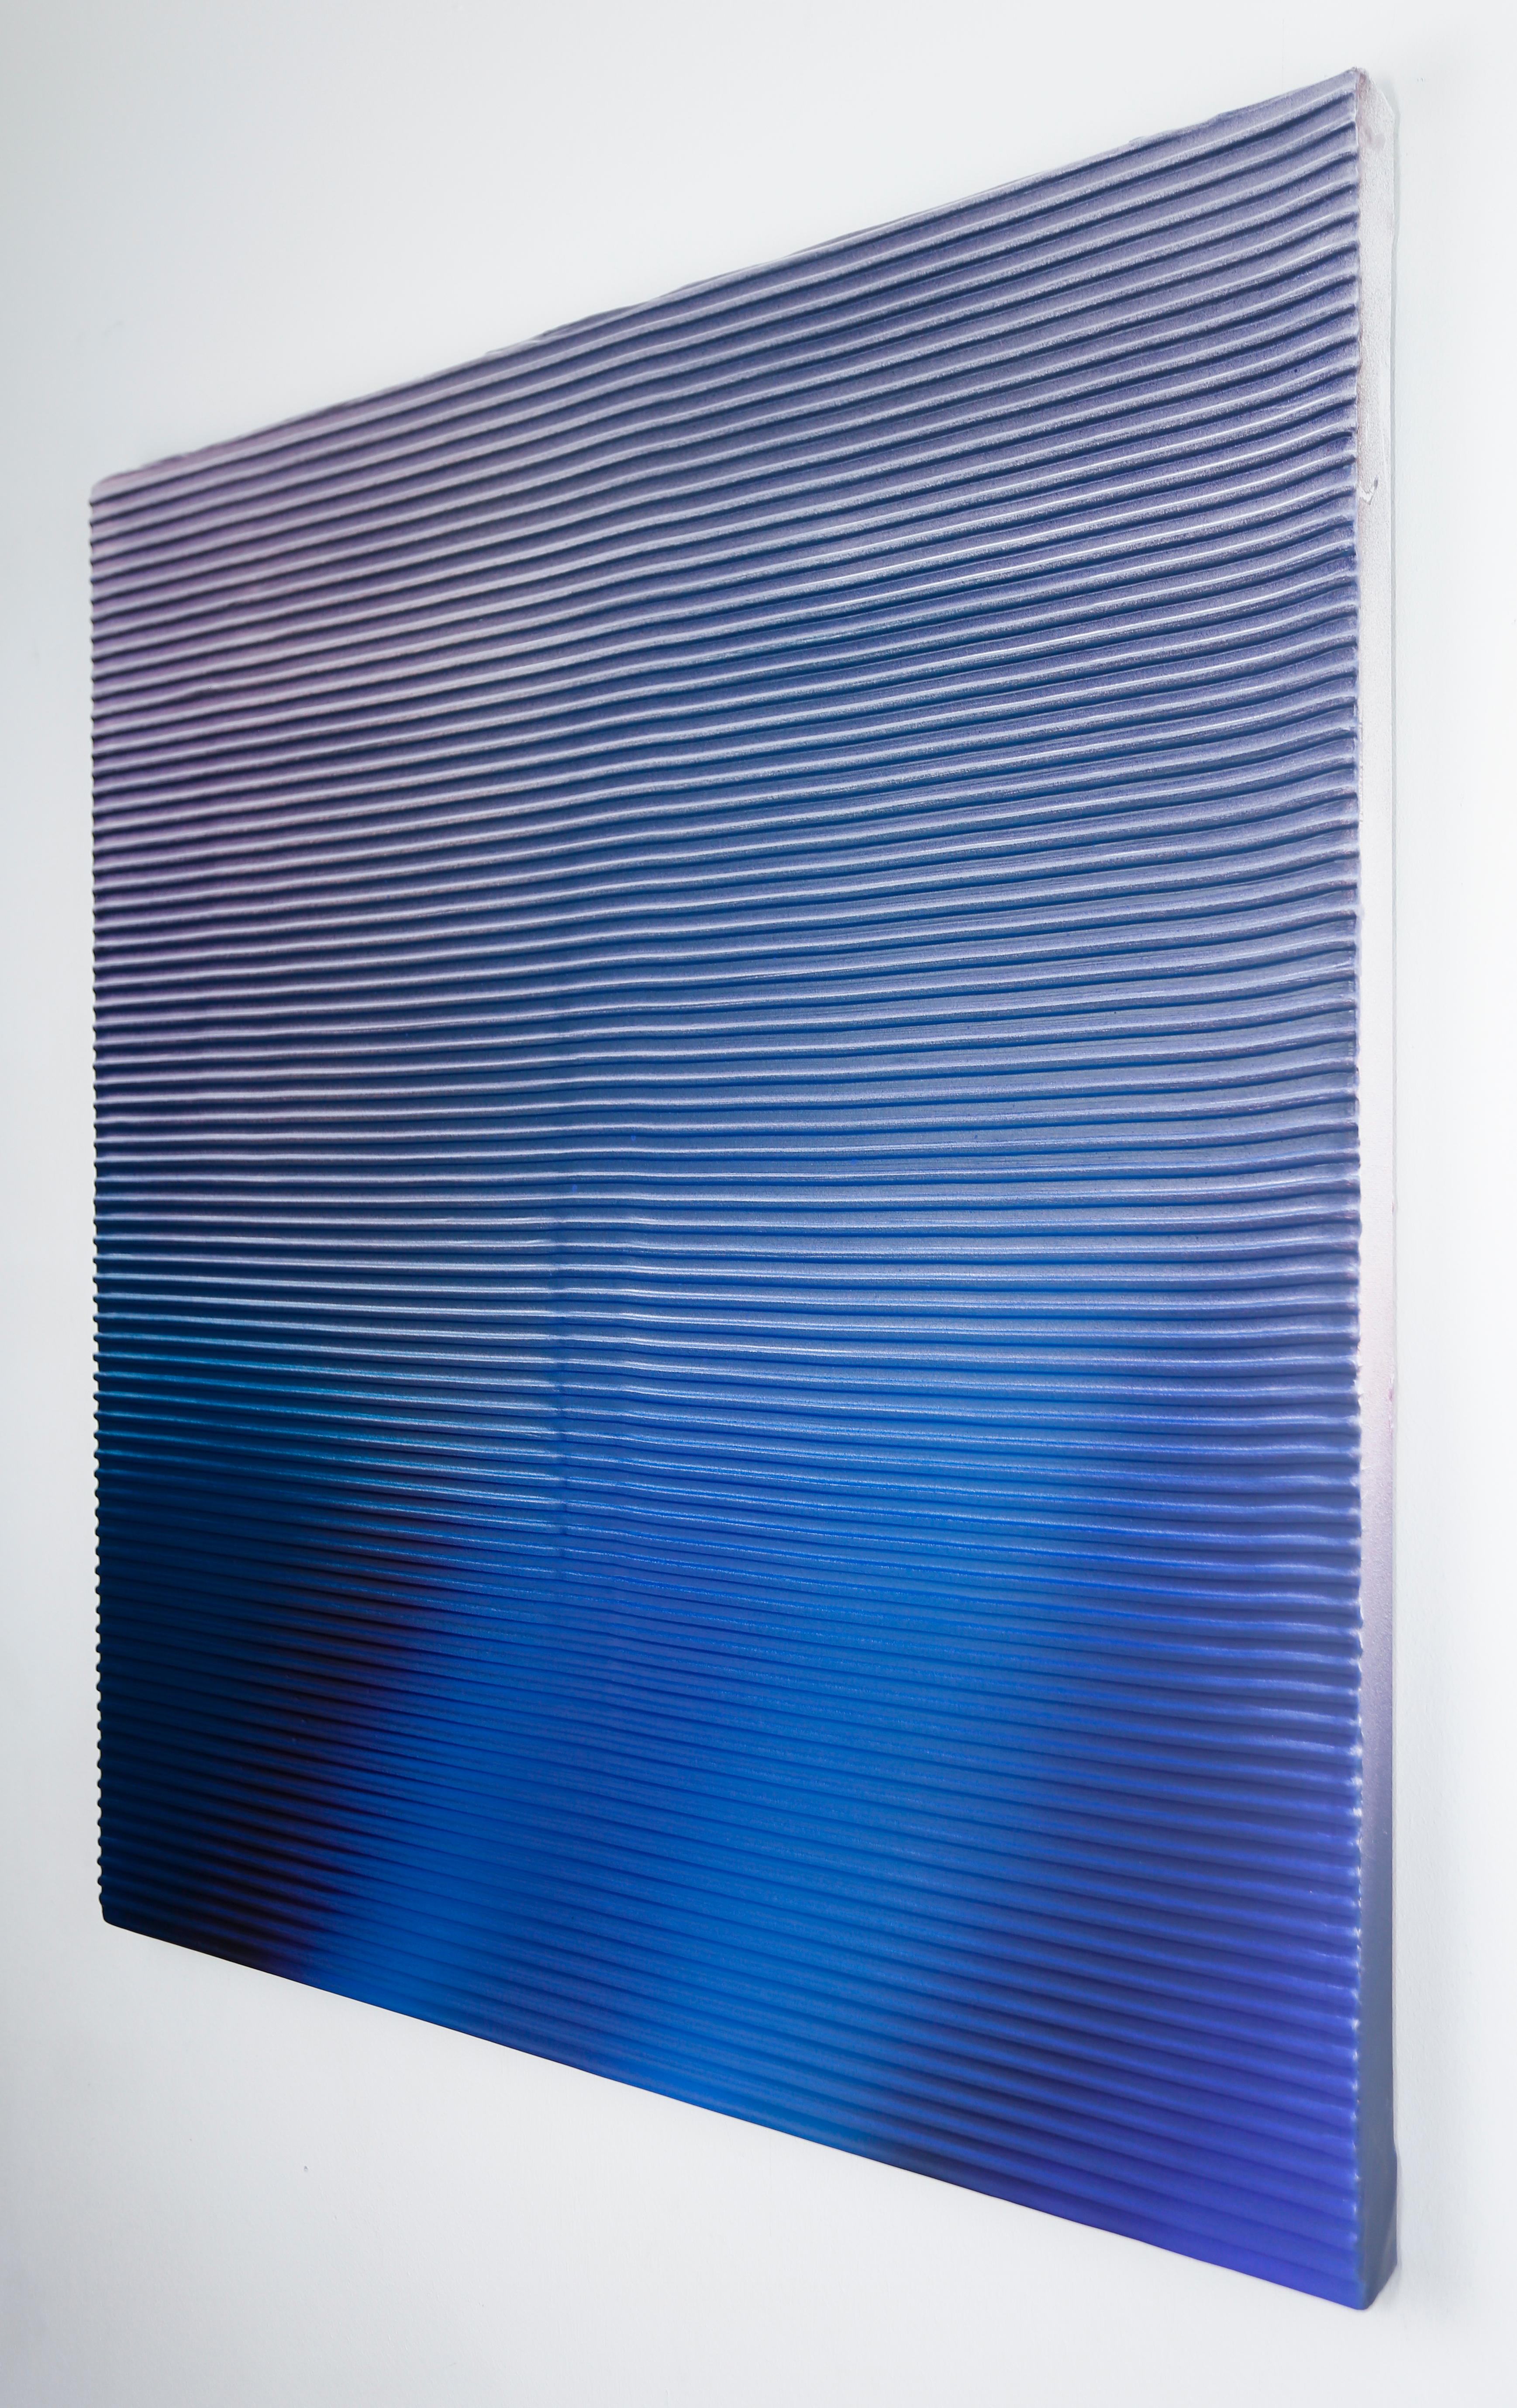 Display No 34 - Striped, geometric, white and blue, minimal, abstract painting  - Painting by Zdenek Konvalina